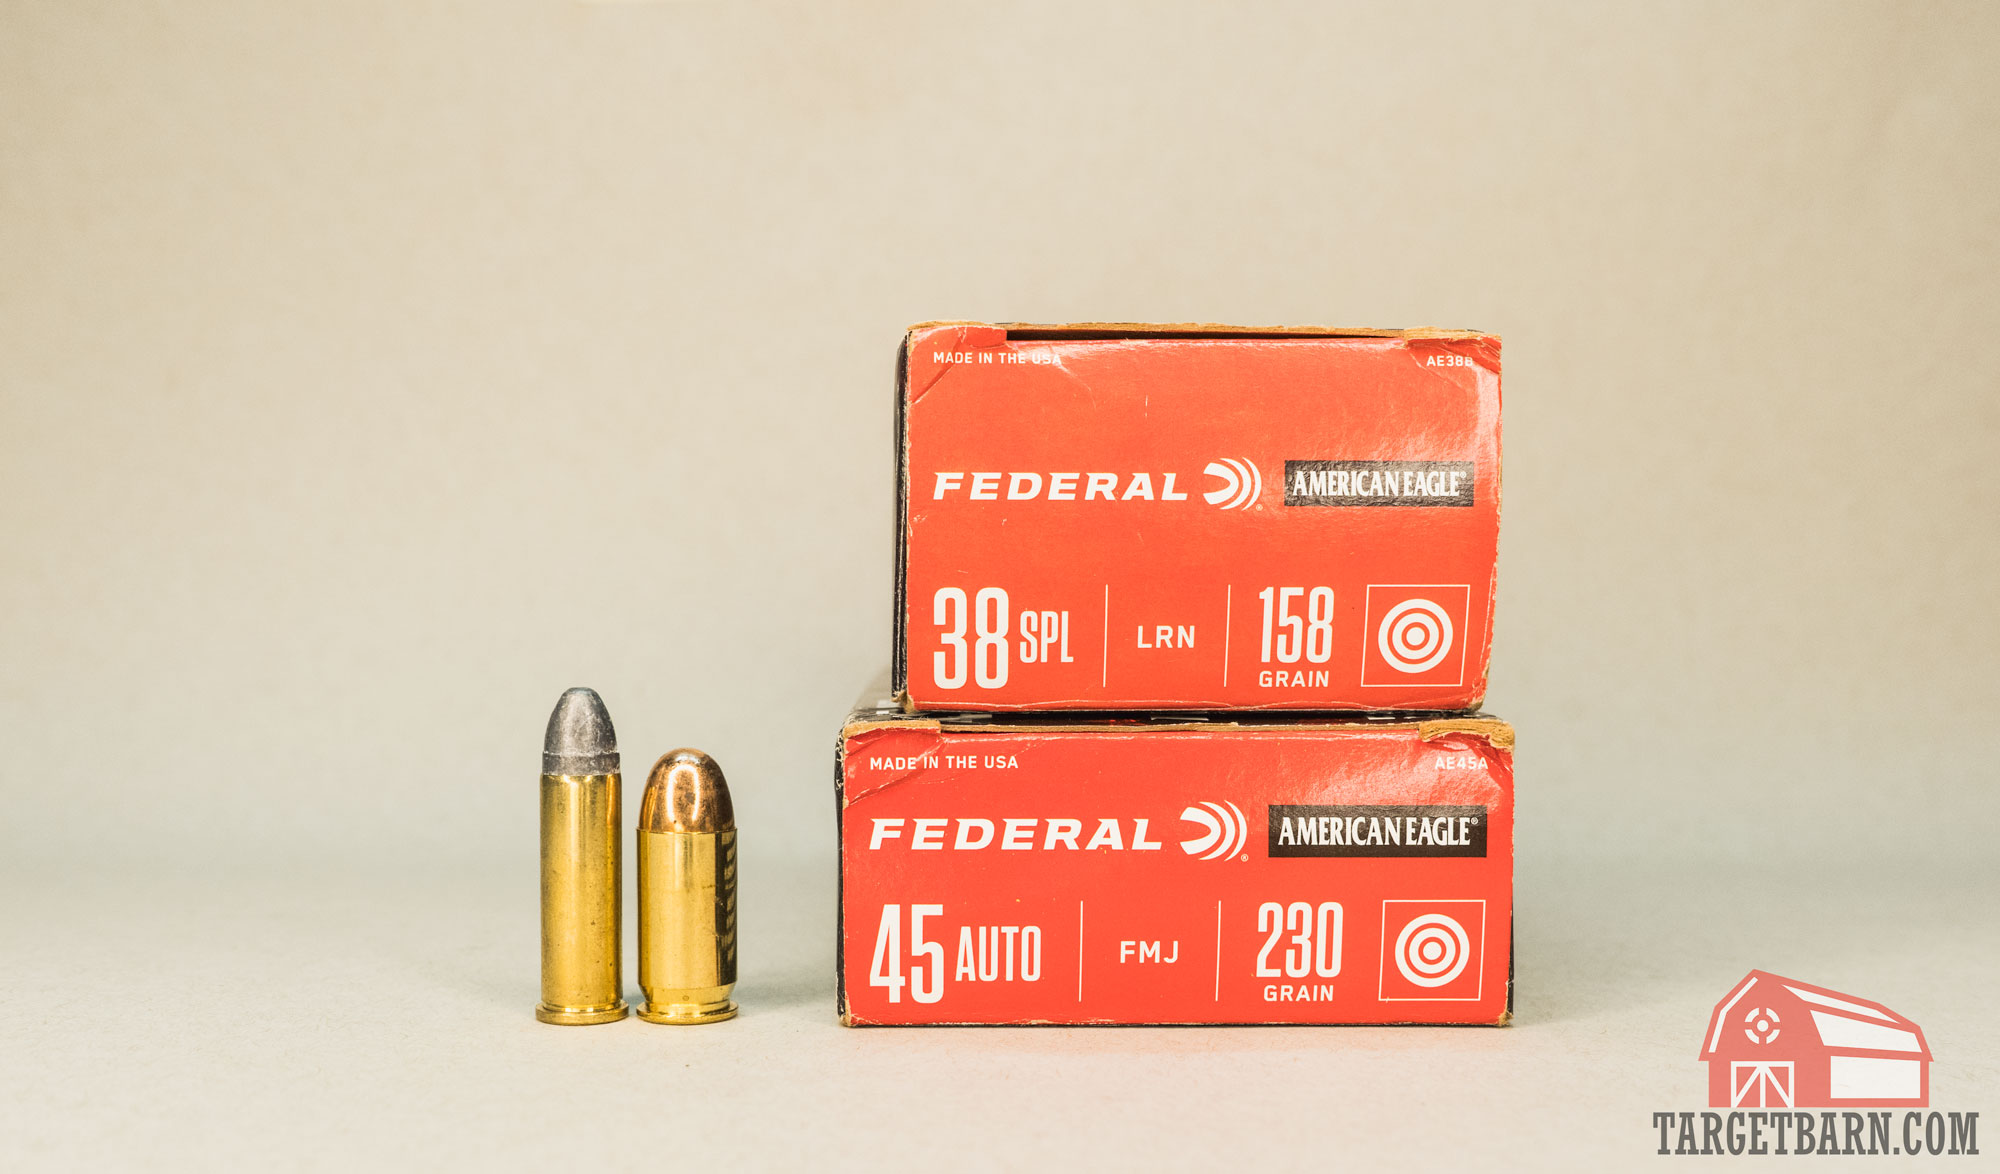 a .38 special round next to a .45 acp round and a box of federal 38 on top of a box of 45 acp